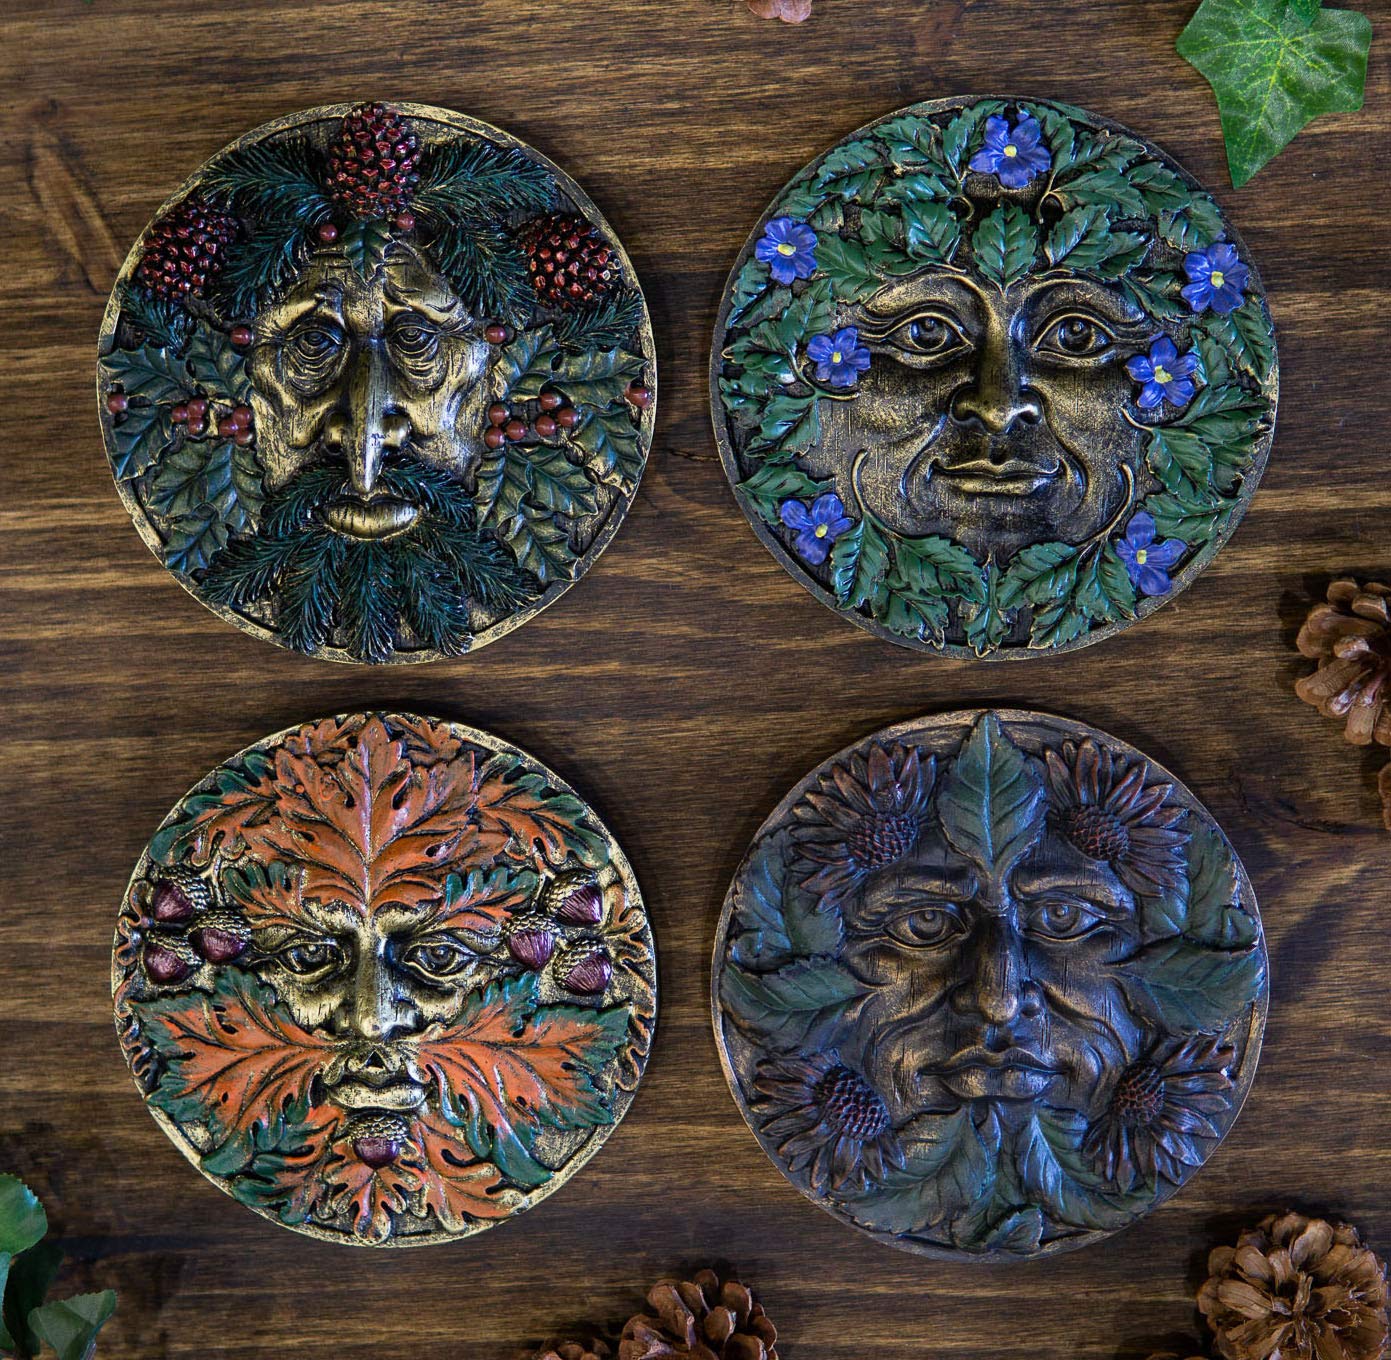 Ebros Bronzed Blooming Floral Foliage Celtic Greenman Wall Decor Tree Spirit Pan Small Round Hanging Plaque As Home Decorative Sculpture Housewarmi...